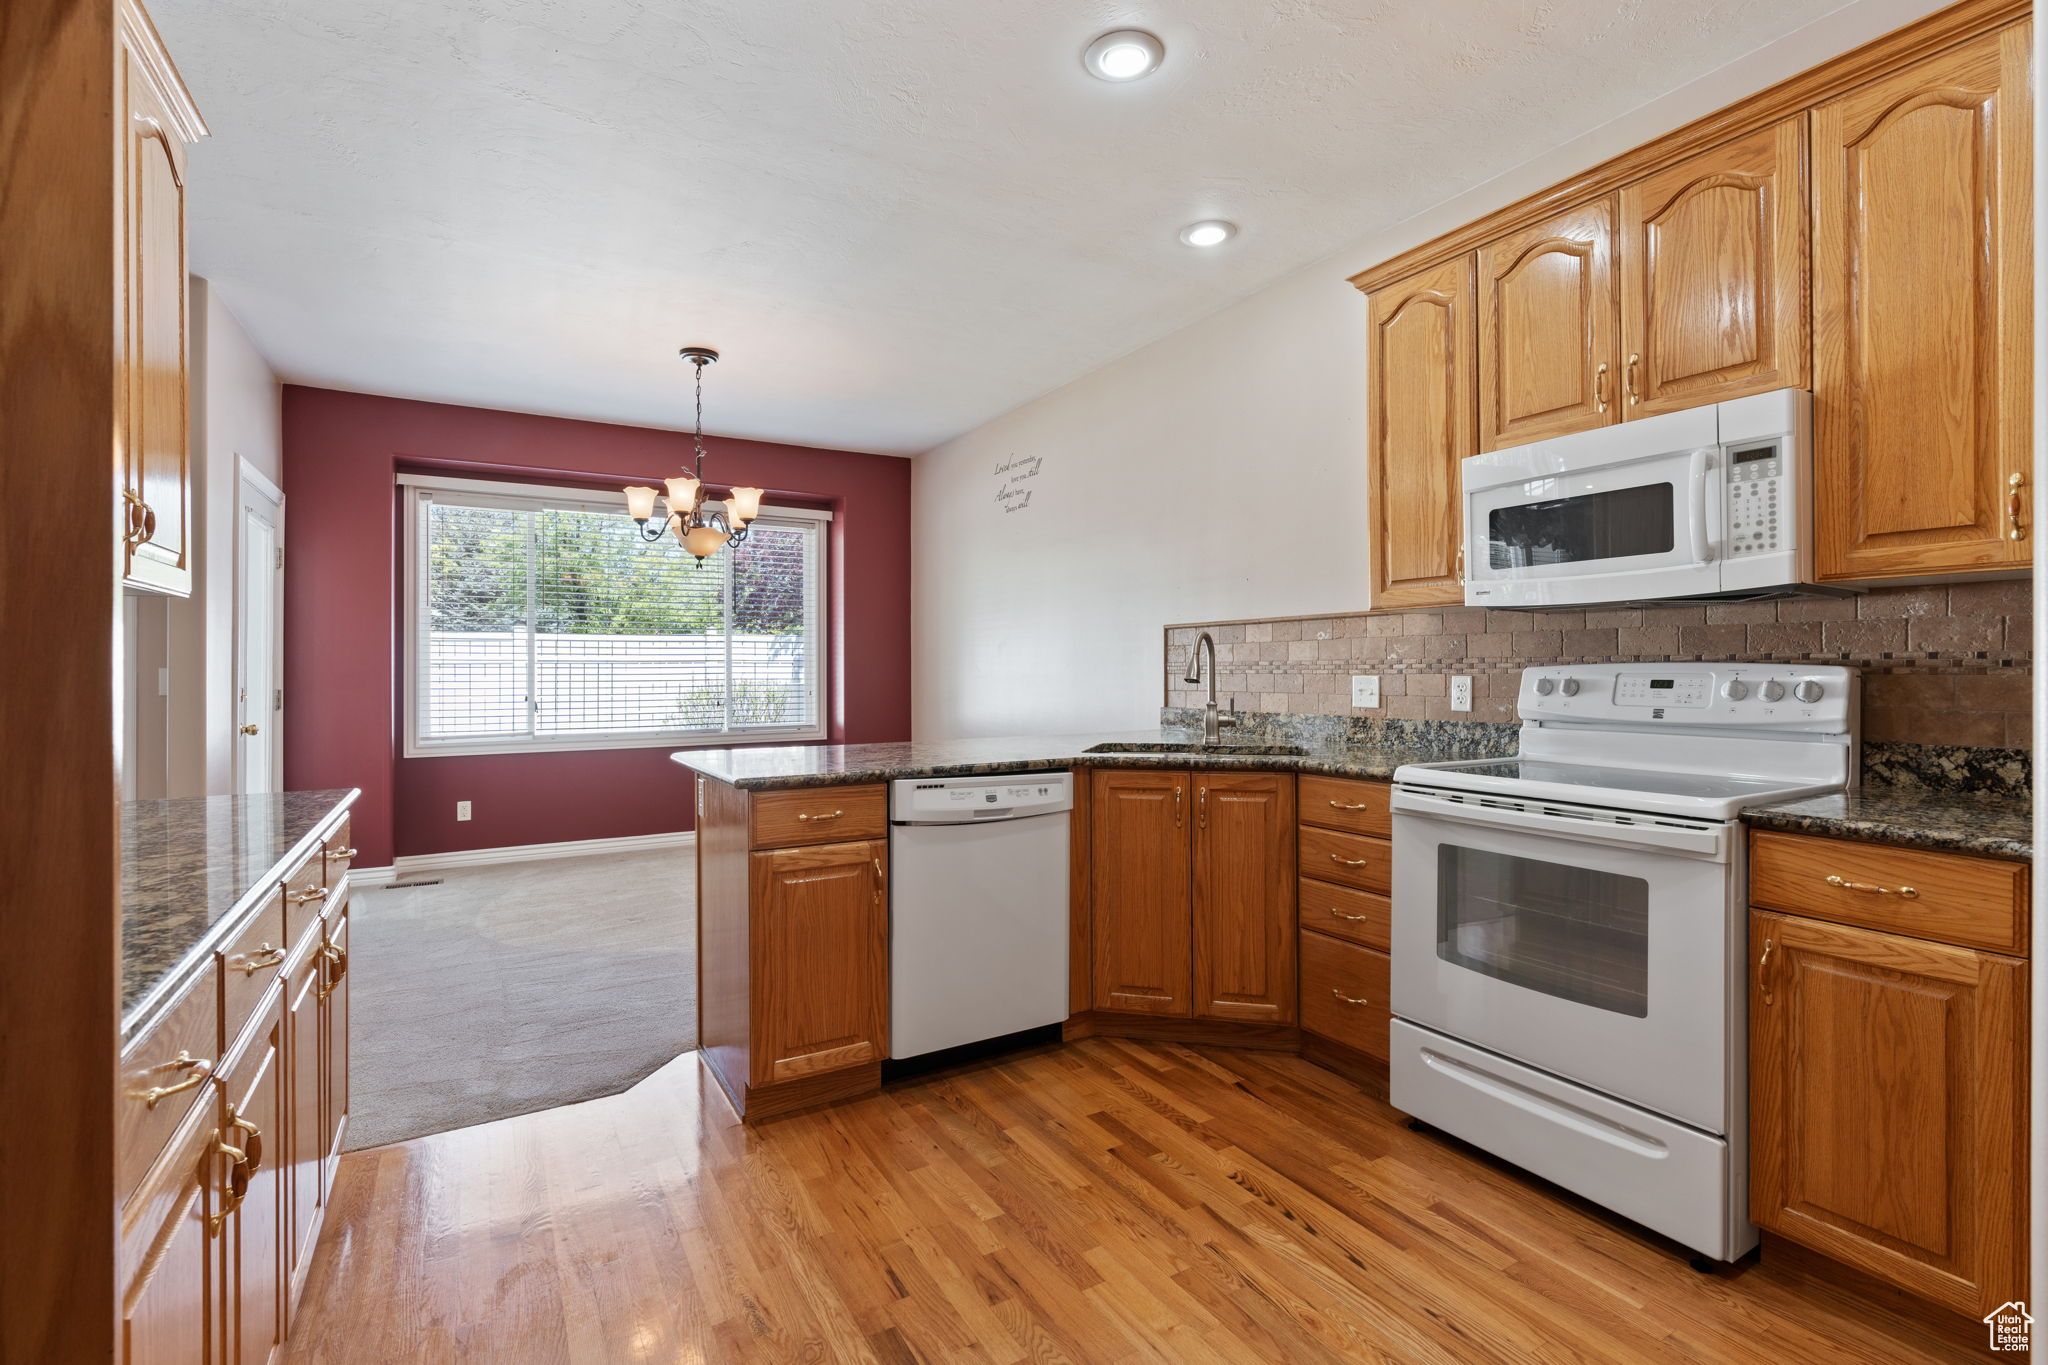 Kitchen featuring white appliances, light hardwood / wood-style floors, granite counters, sink, and a notable chandelier